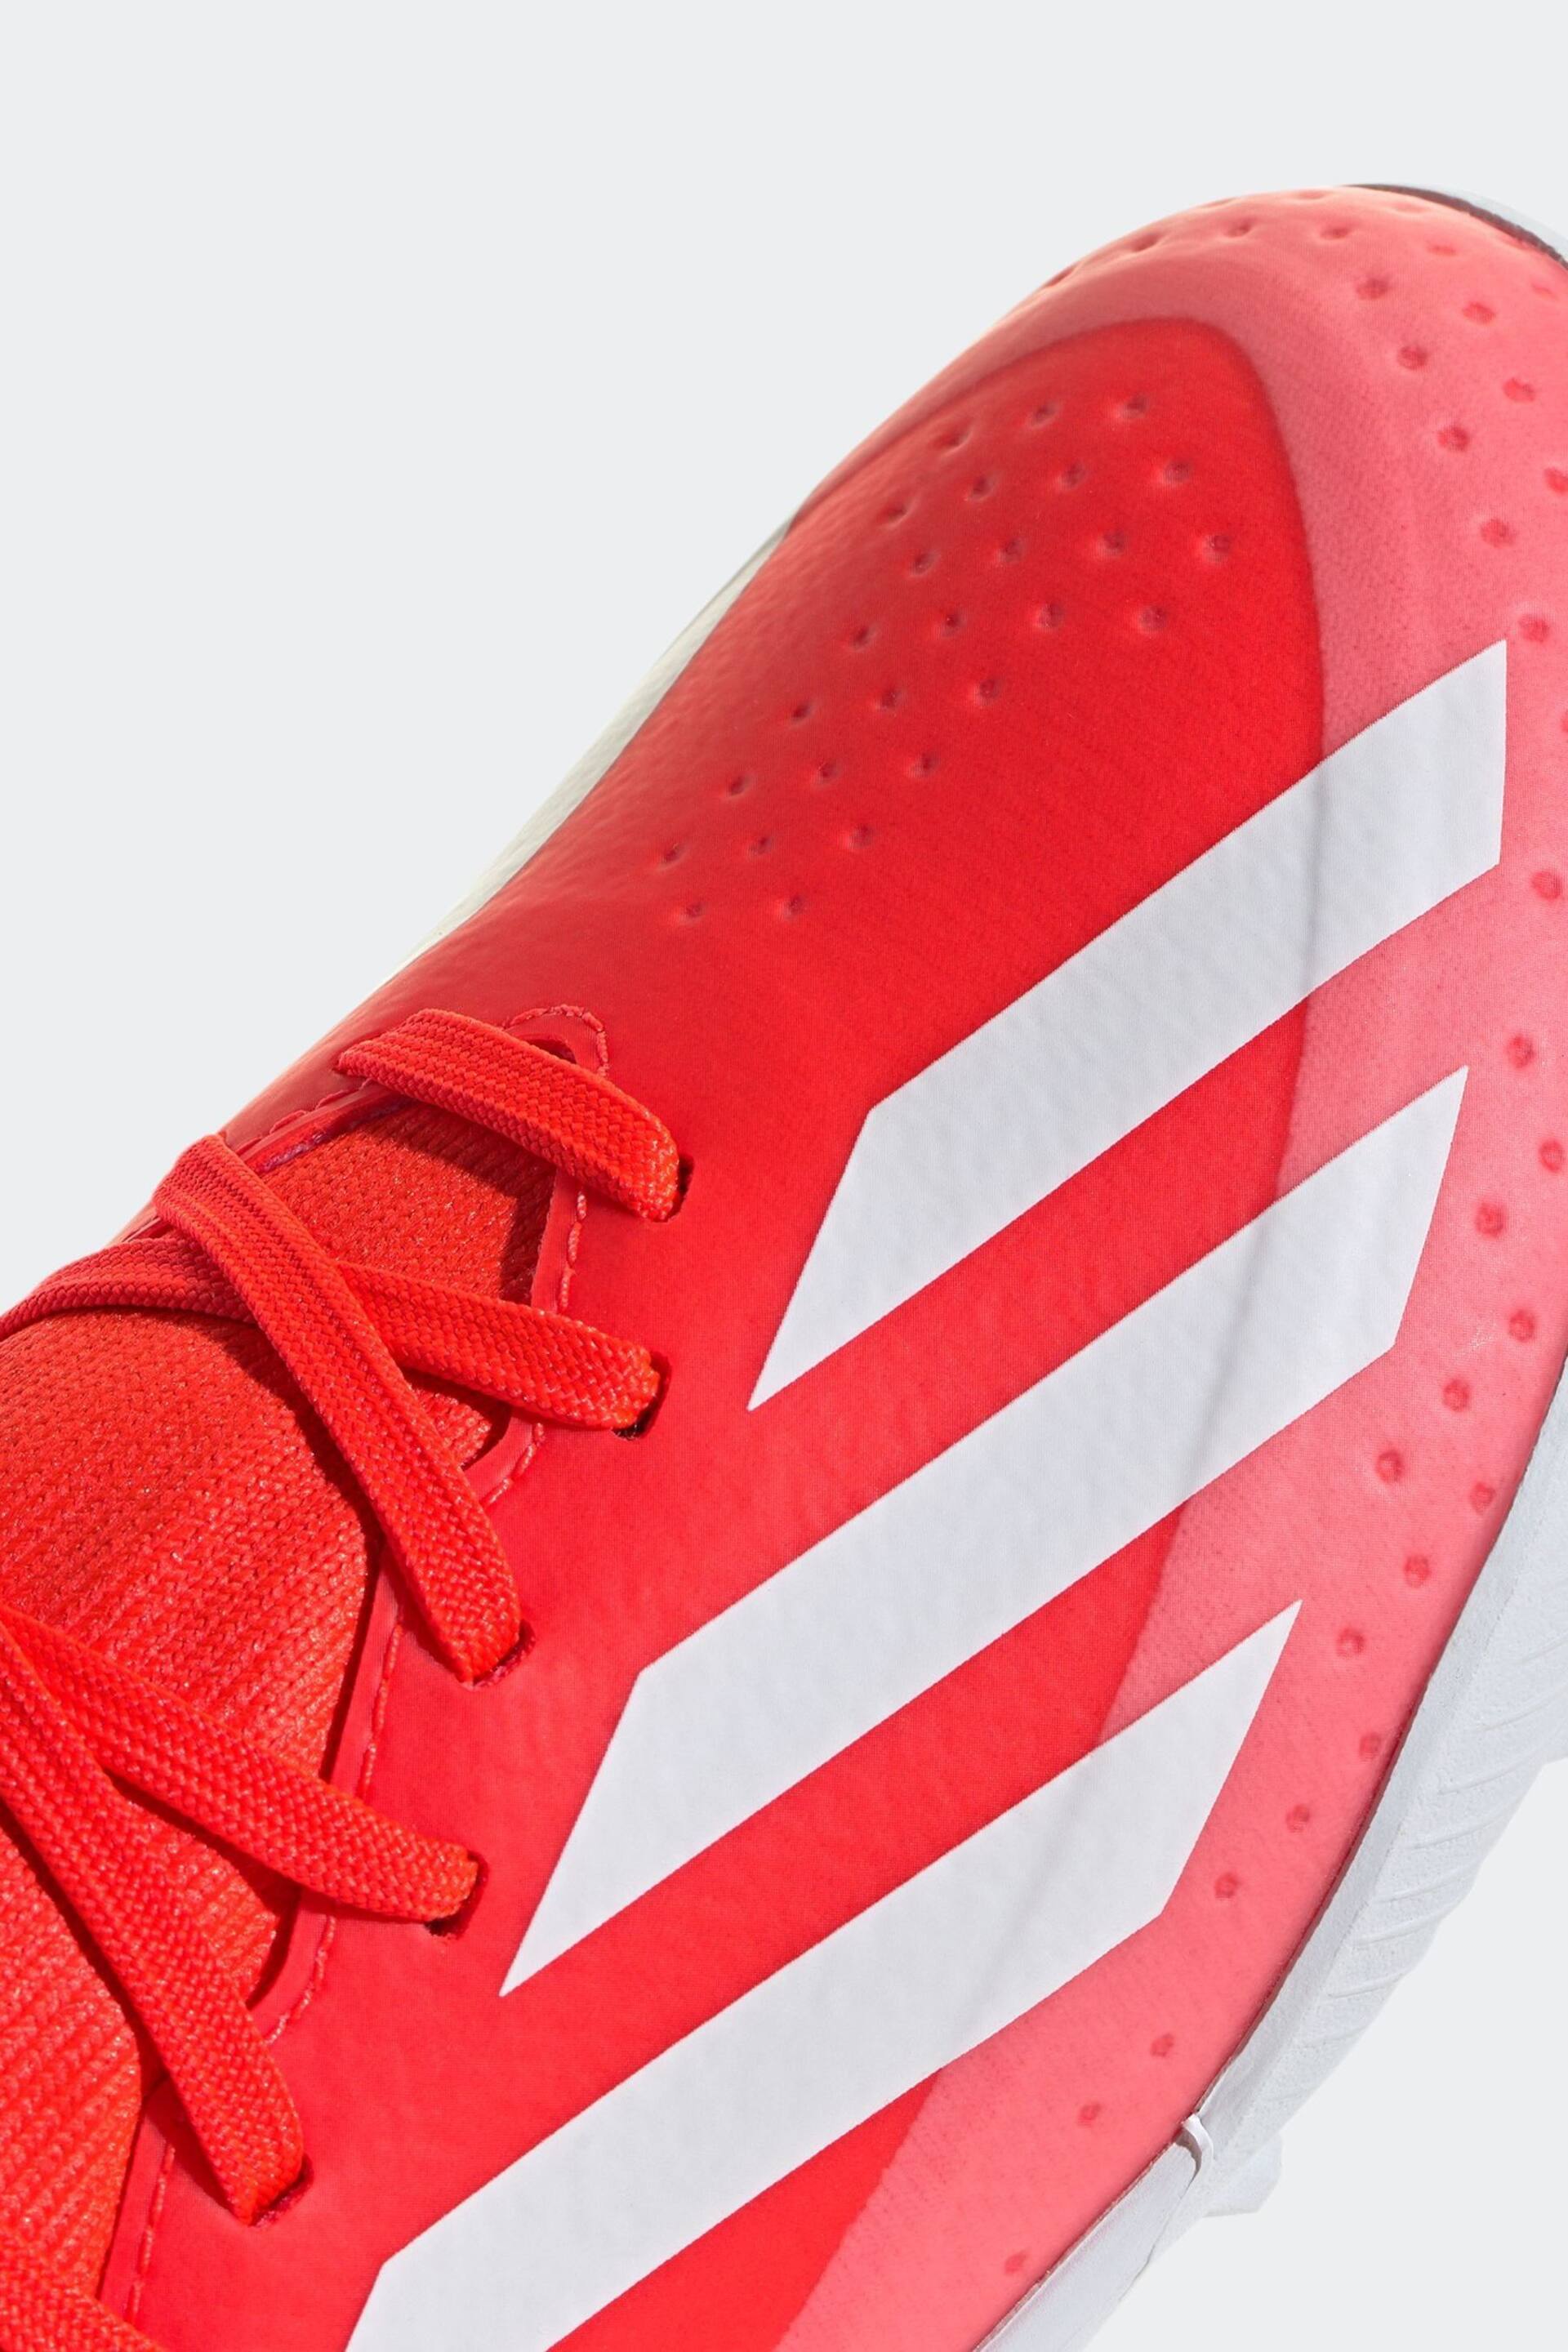 adidas Red/White Football X Crazyfast League Turf Kids Boots - Image 9 of 10